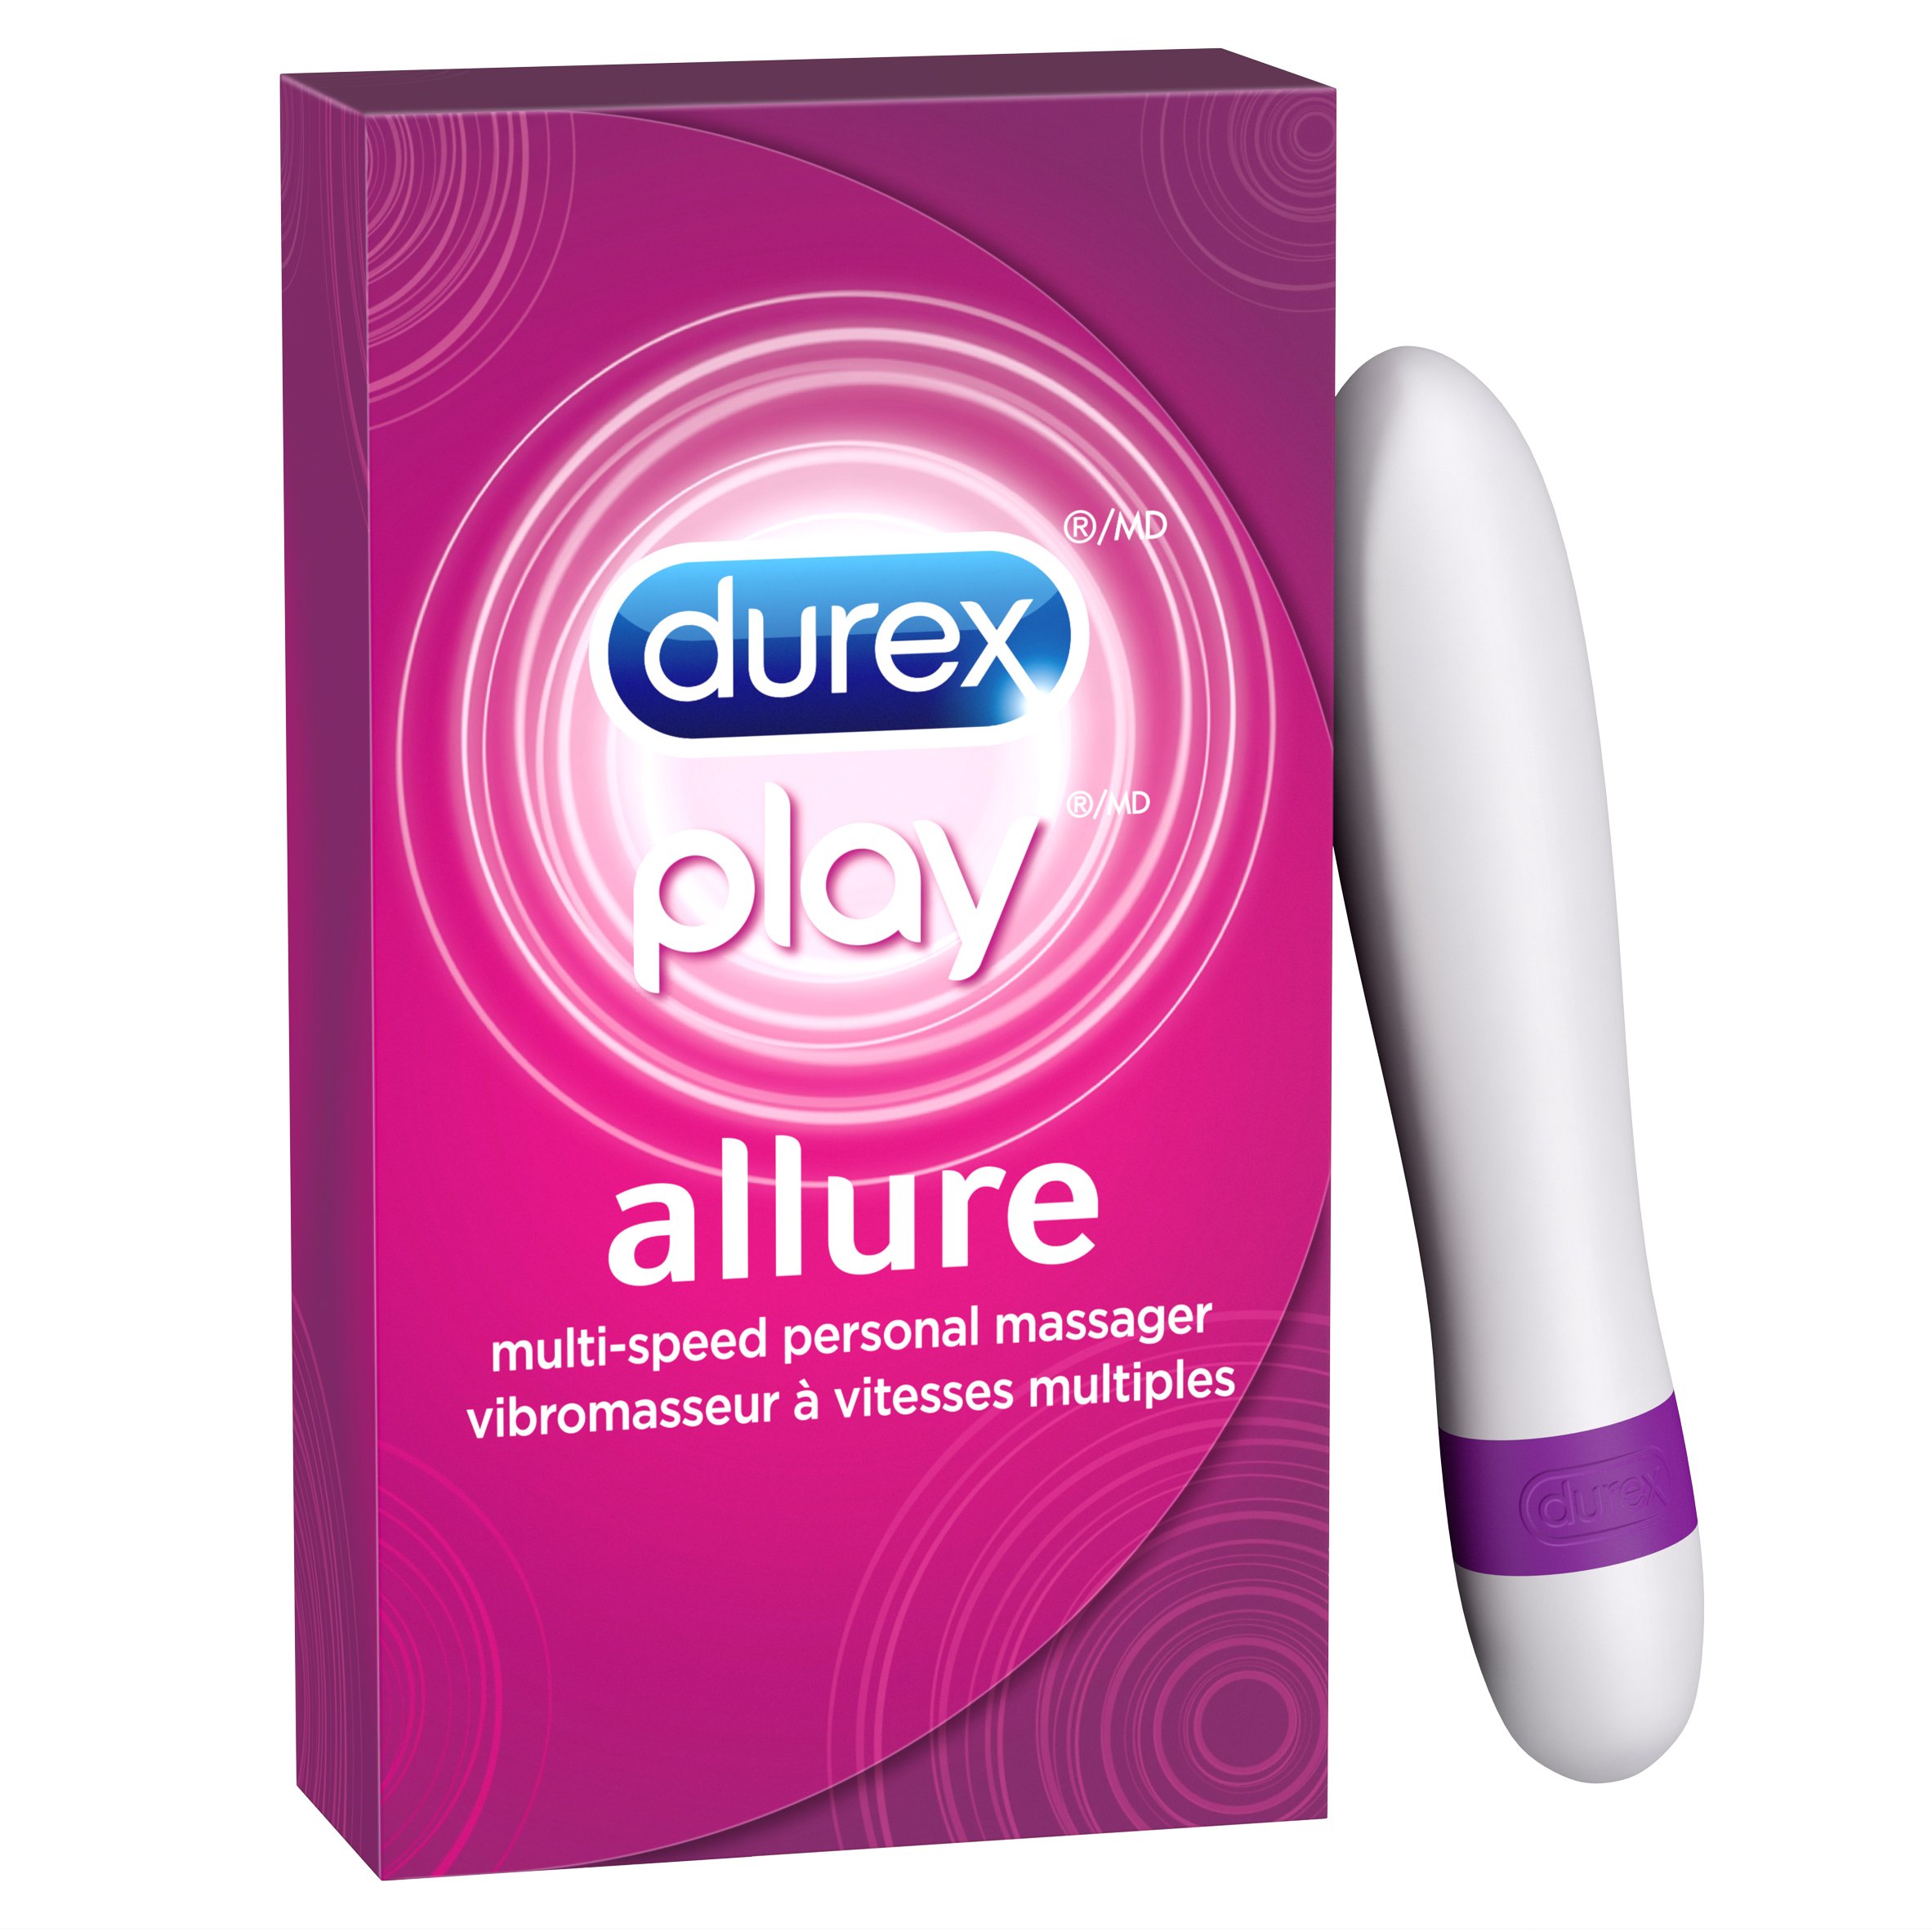 callie house recommends Play Allure Personal Massager